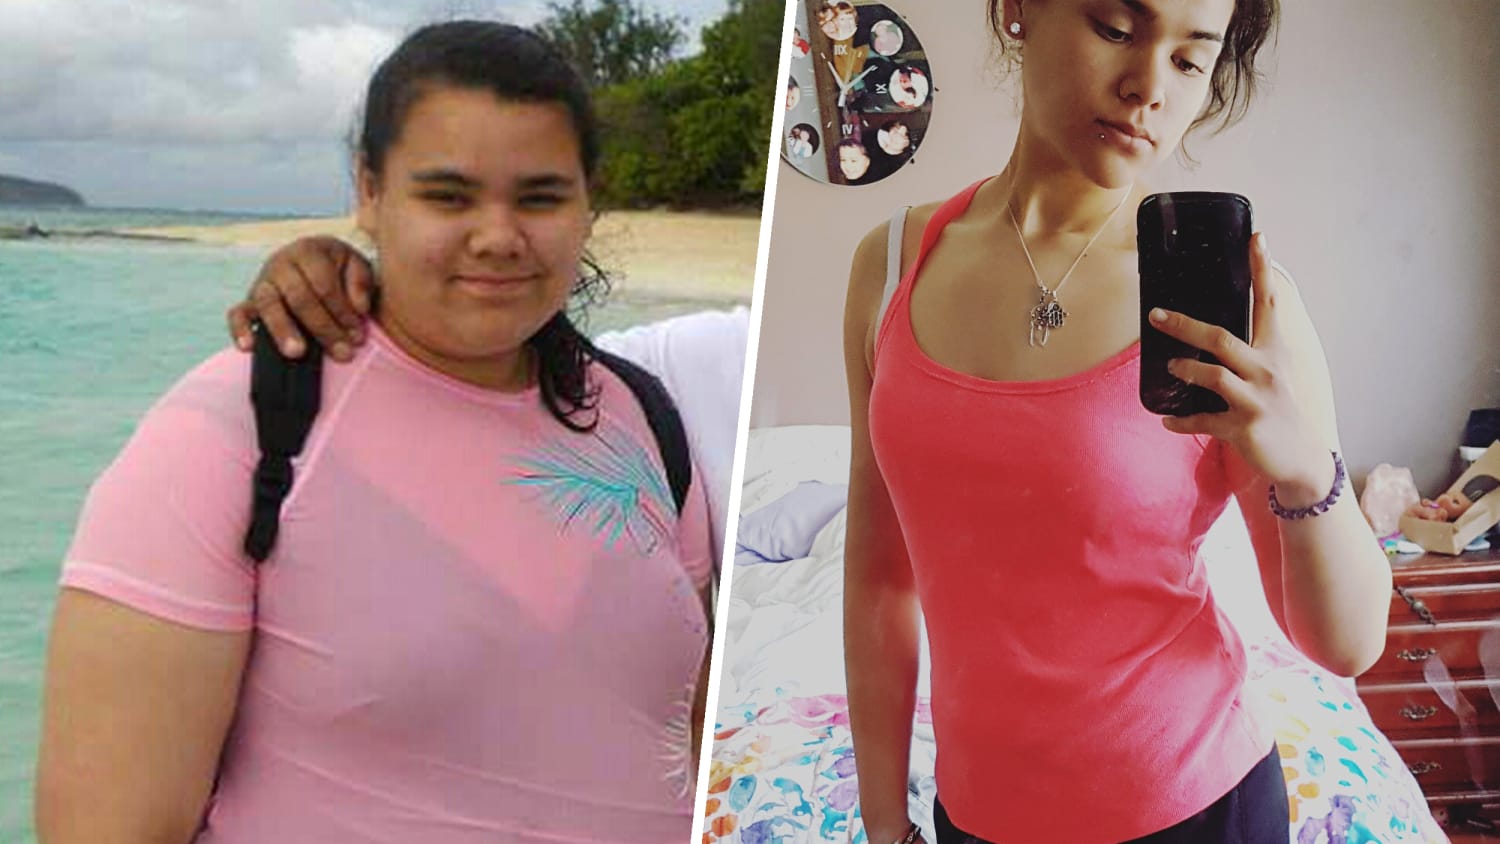 After a doctor told her she was insulin resistant, 14-year-old Mele Osai kn...